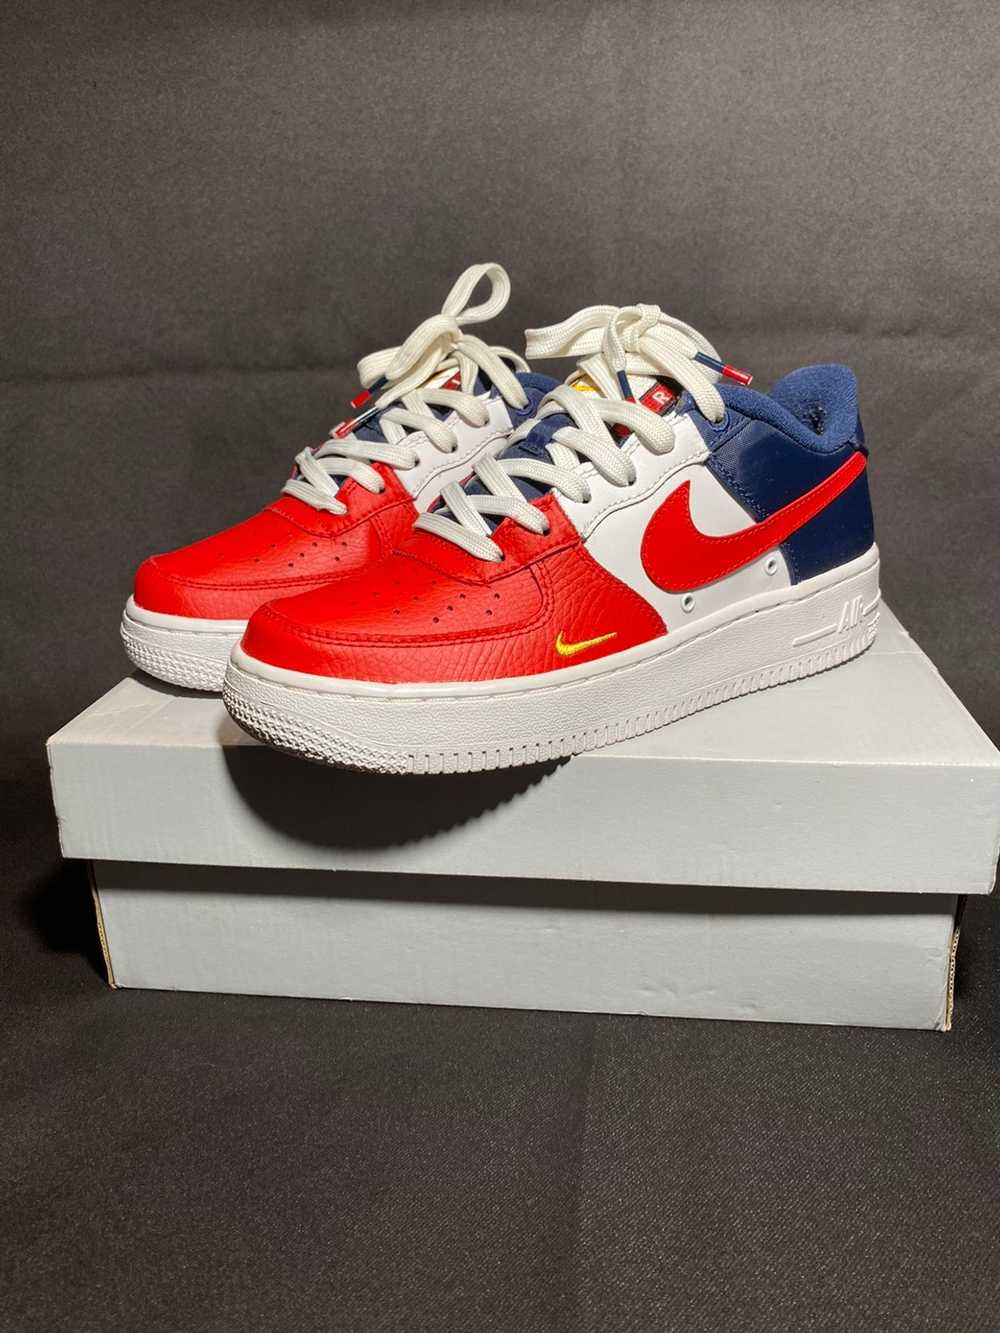 Nike Air Force 1 “independence day” - image 3